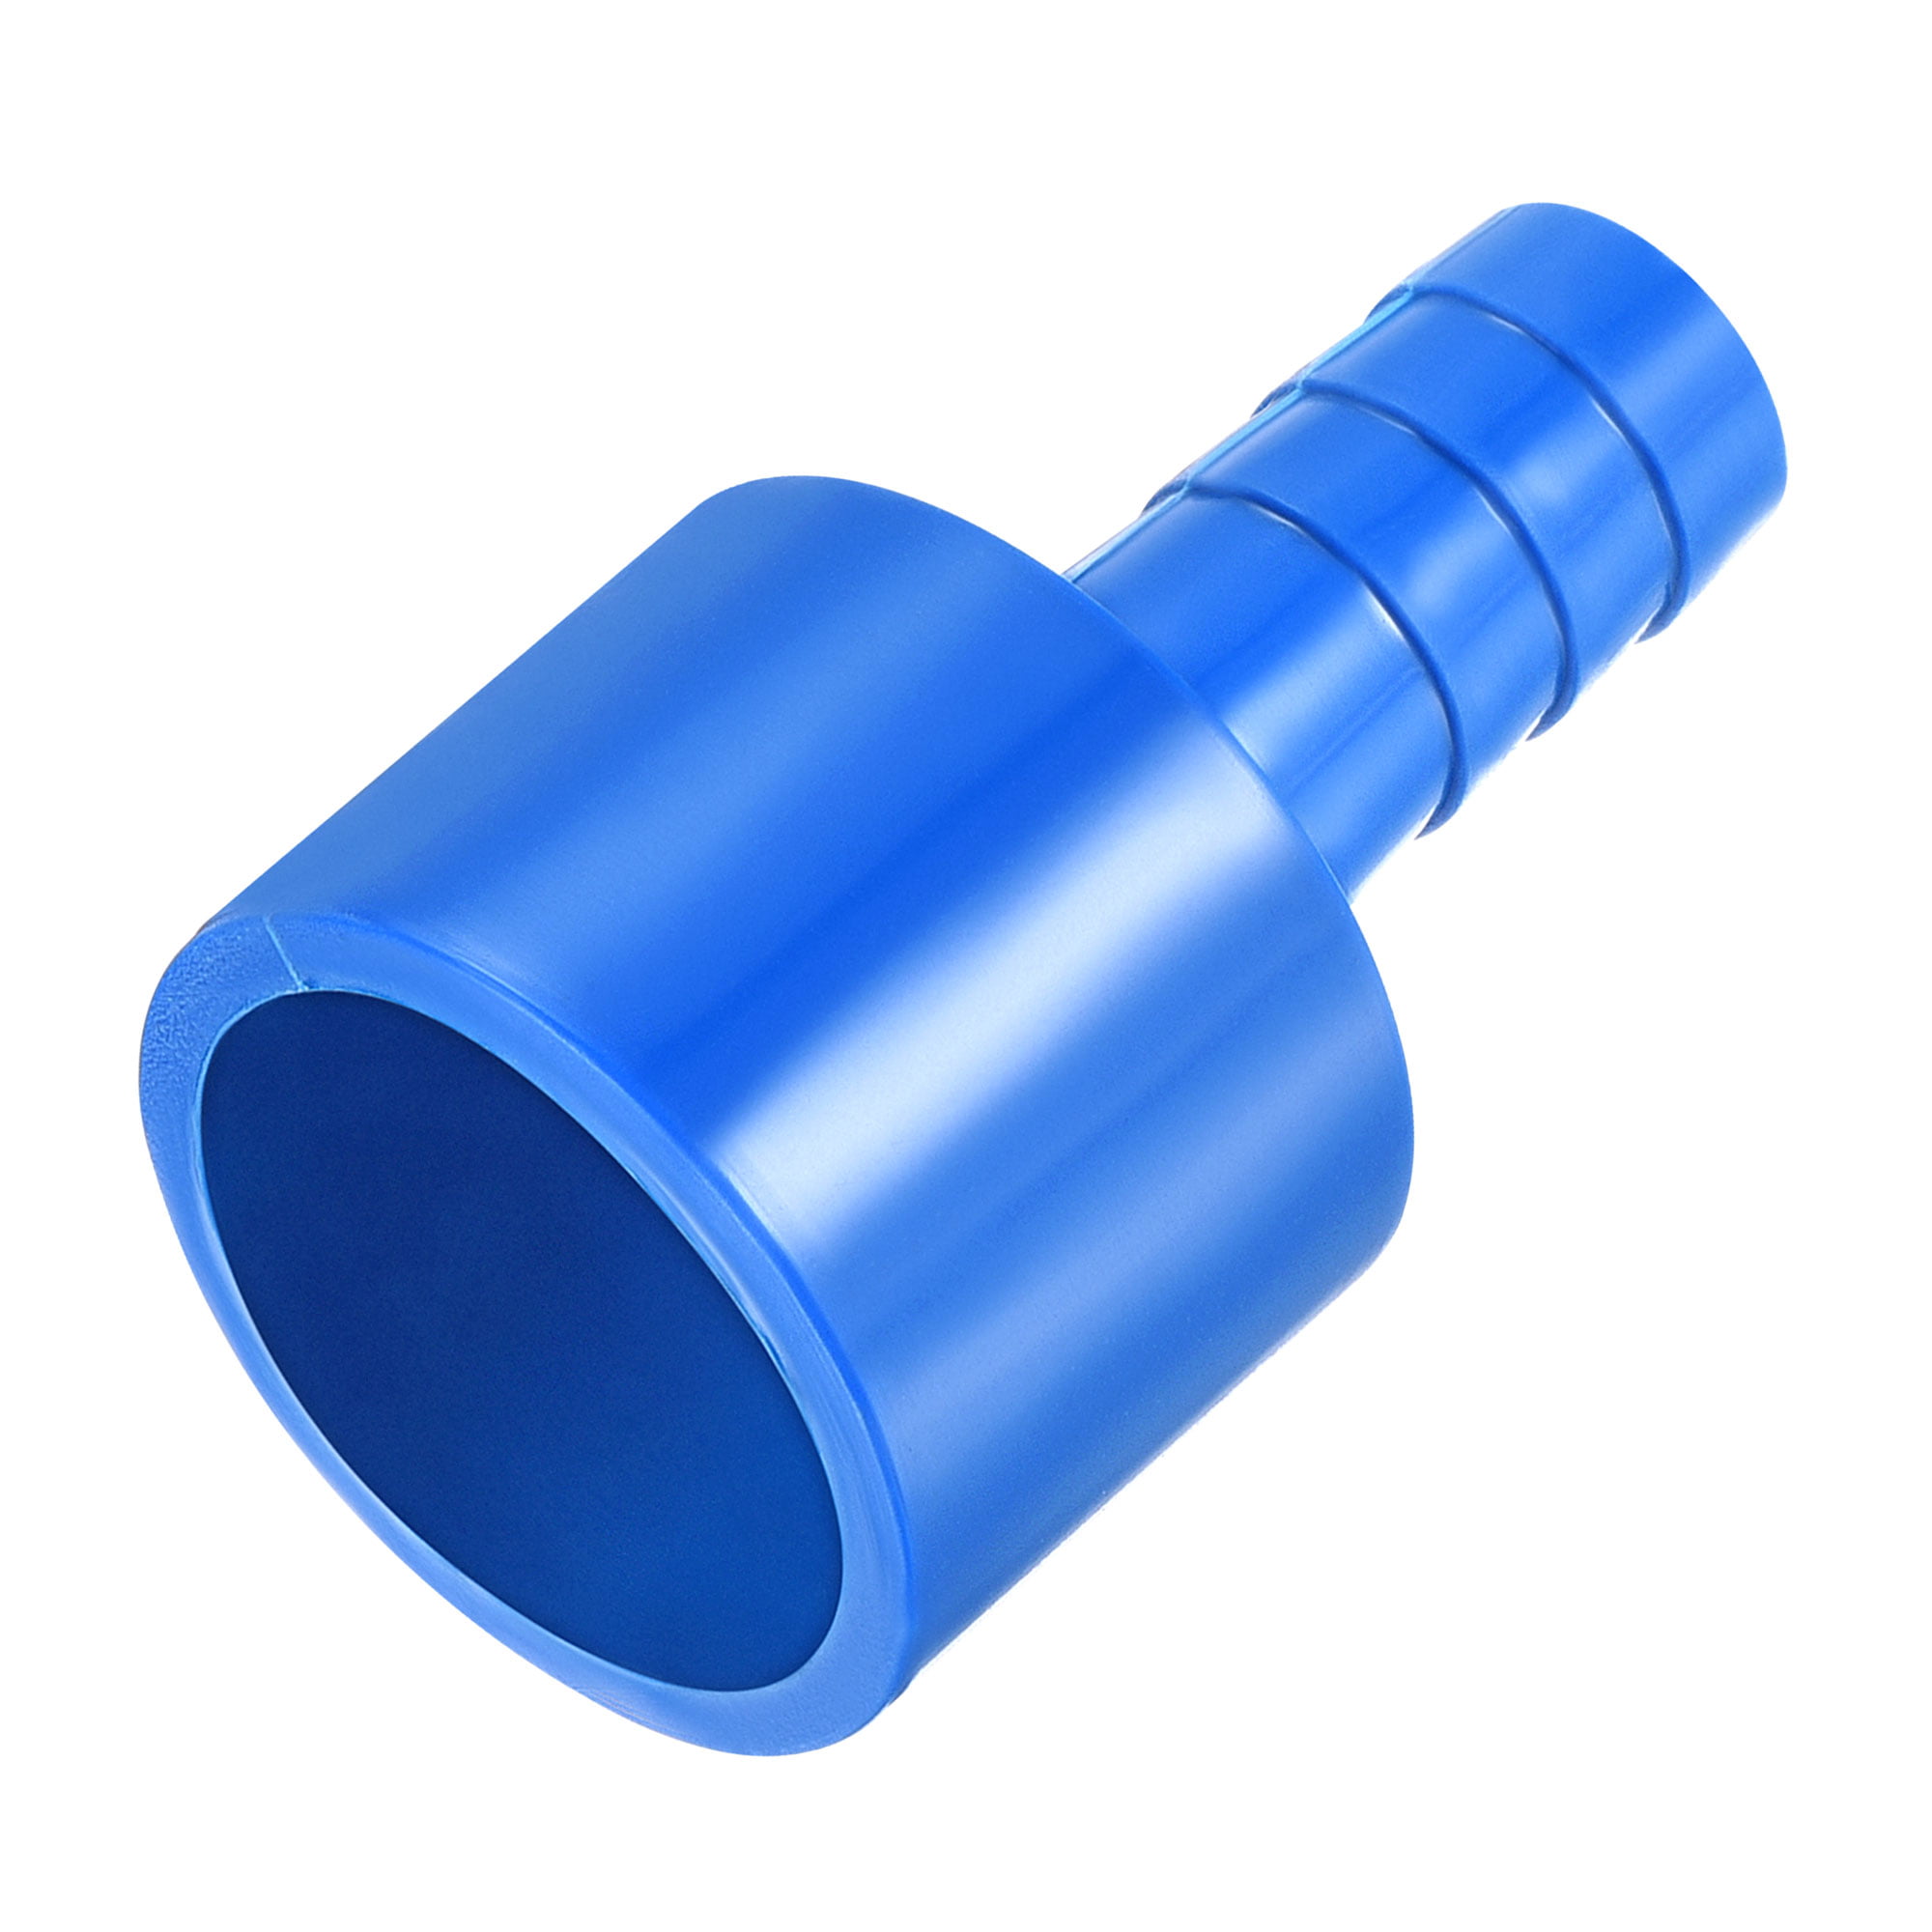 Uxcell 10mm Barbed x 20mm ID Spigot Straight PVC Pipe Fitting